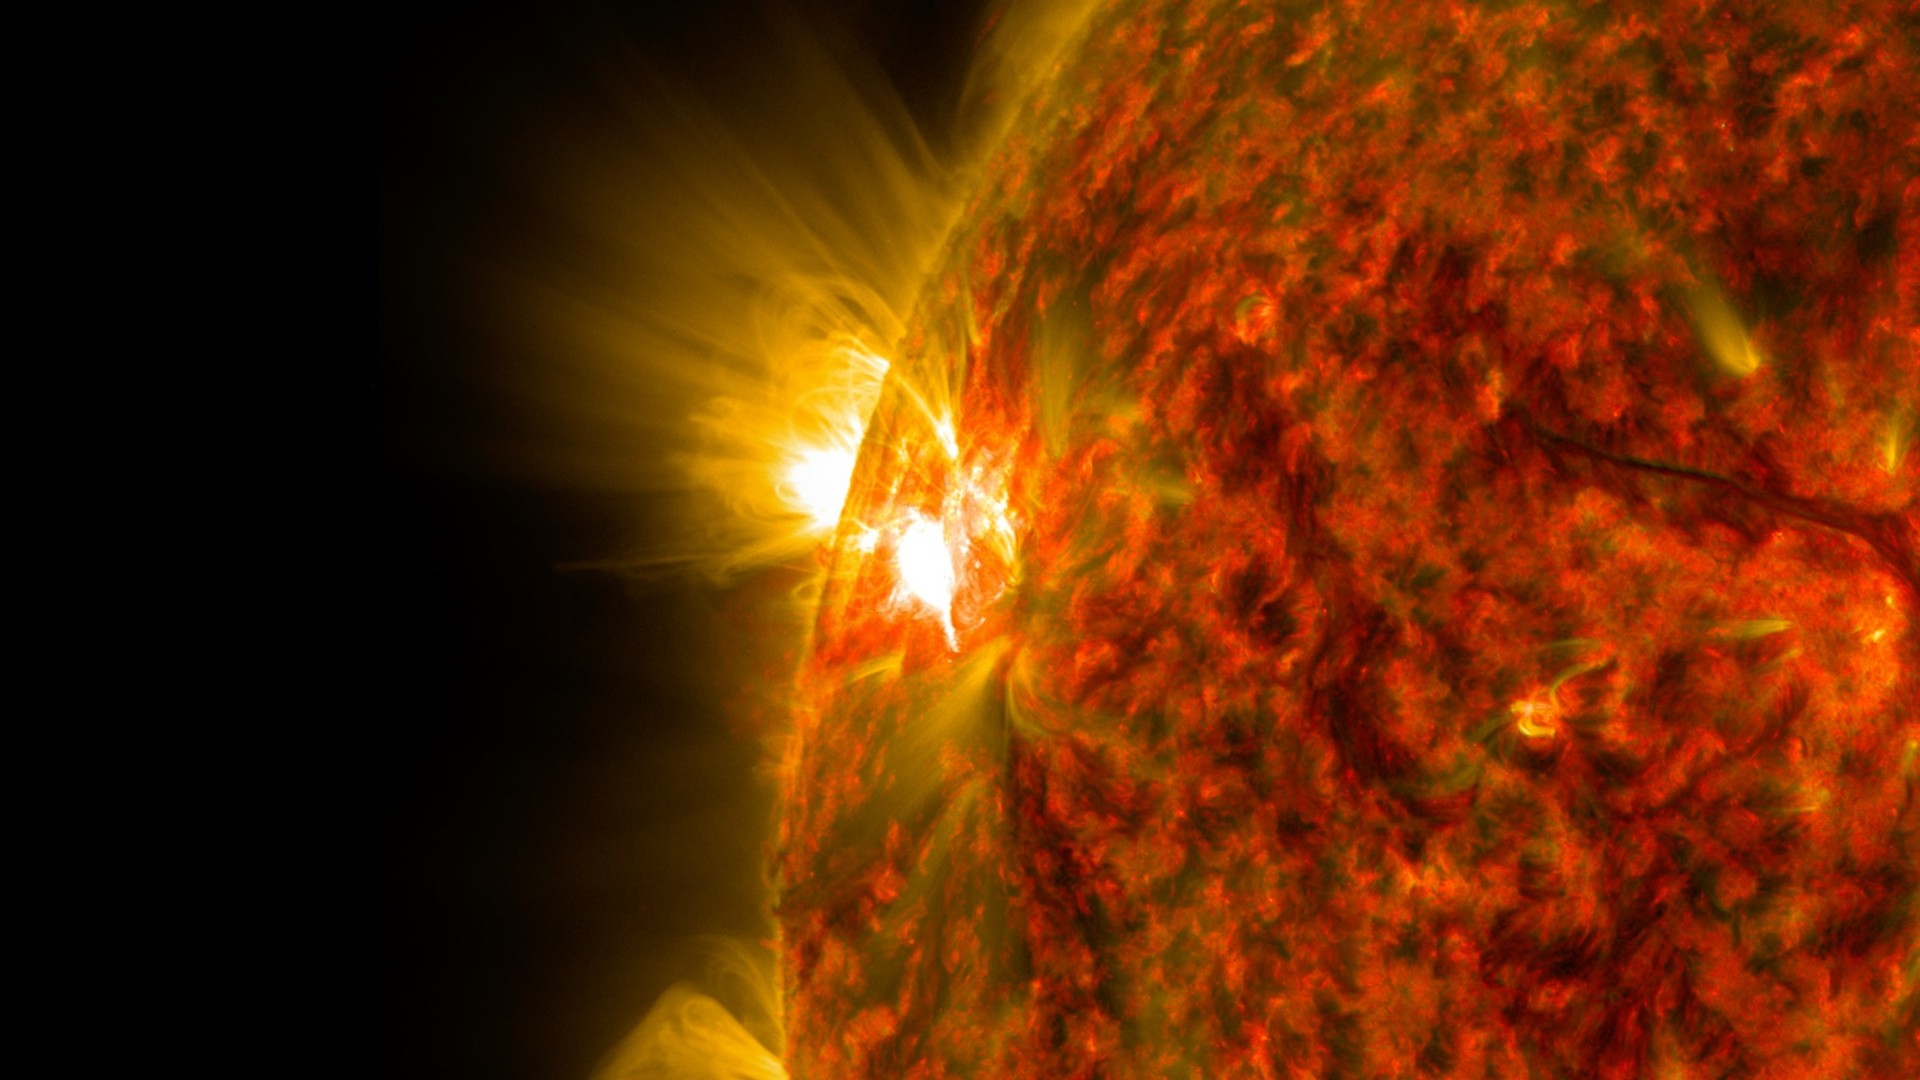 A solar flare captured in extreme ultraviolet light by NASA's Solar Dynamics Observatory. Here we see a fiery orange and black sphere, and at one point a white-hot explosion.